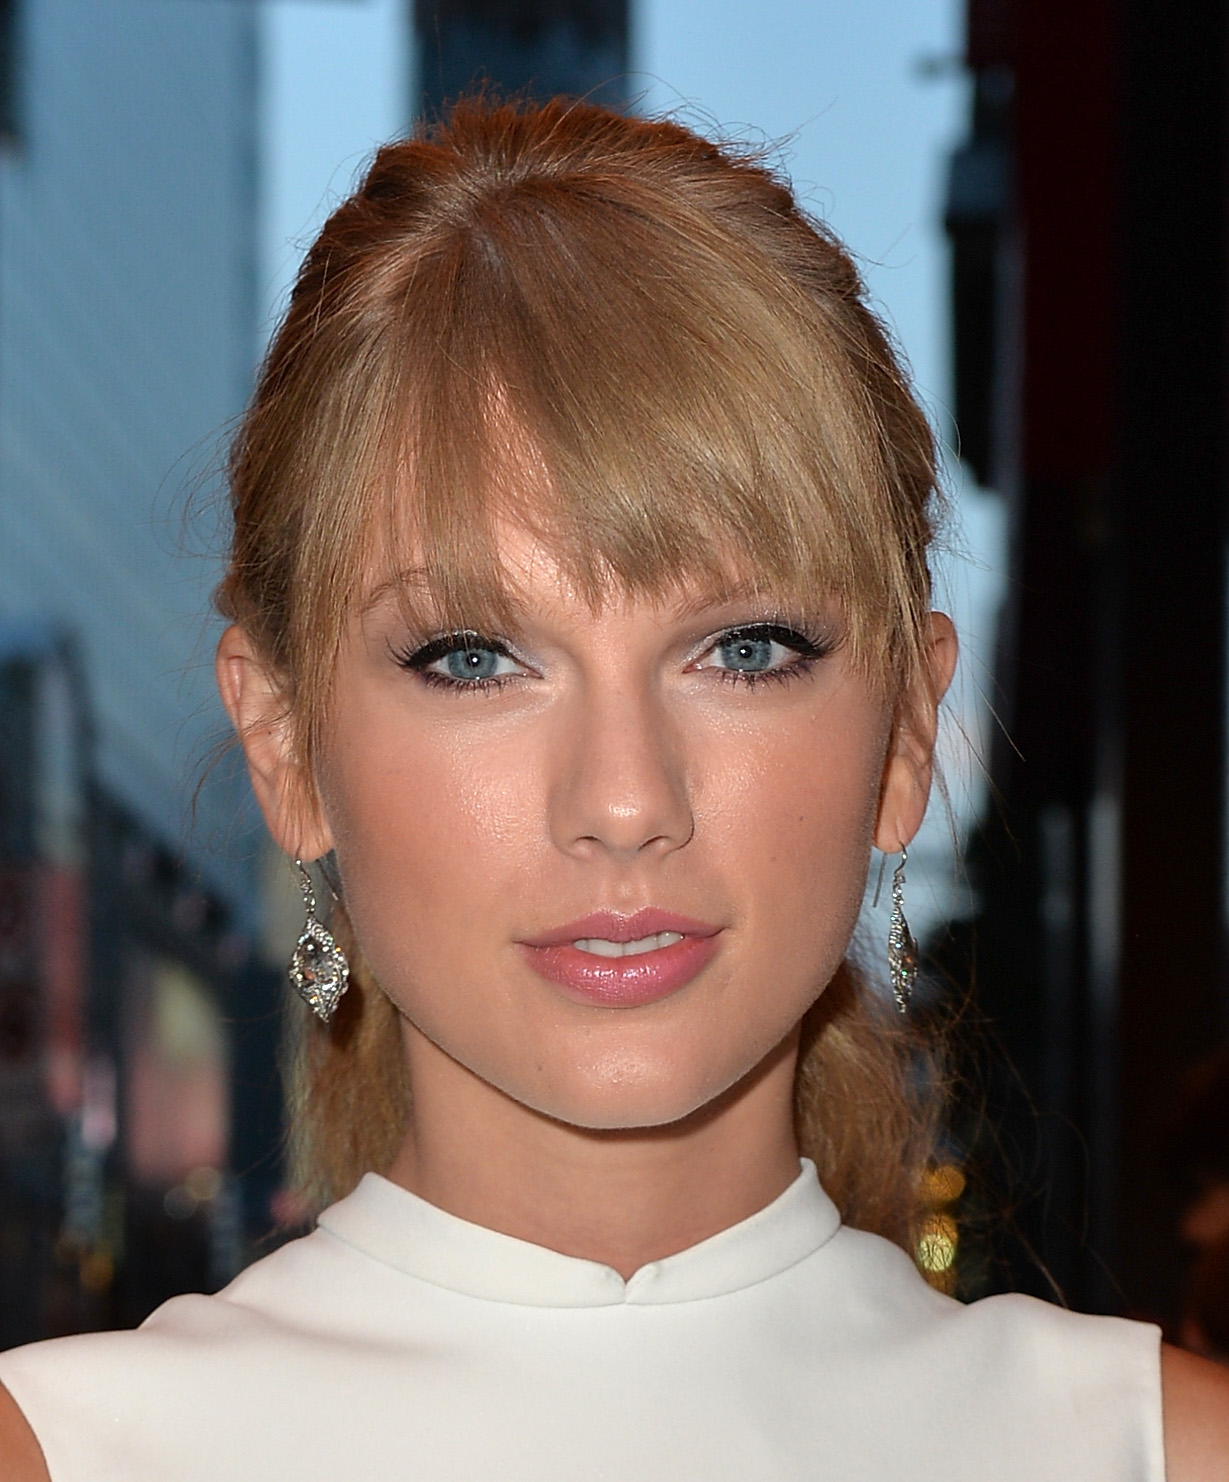 Taylor Swift at the premiere of "One Chance," 2013 | Source: Getty Images